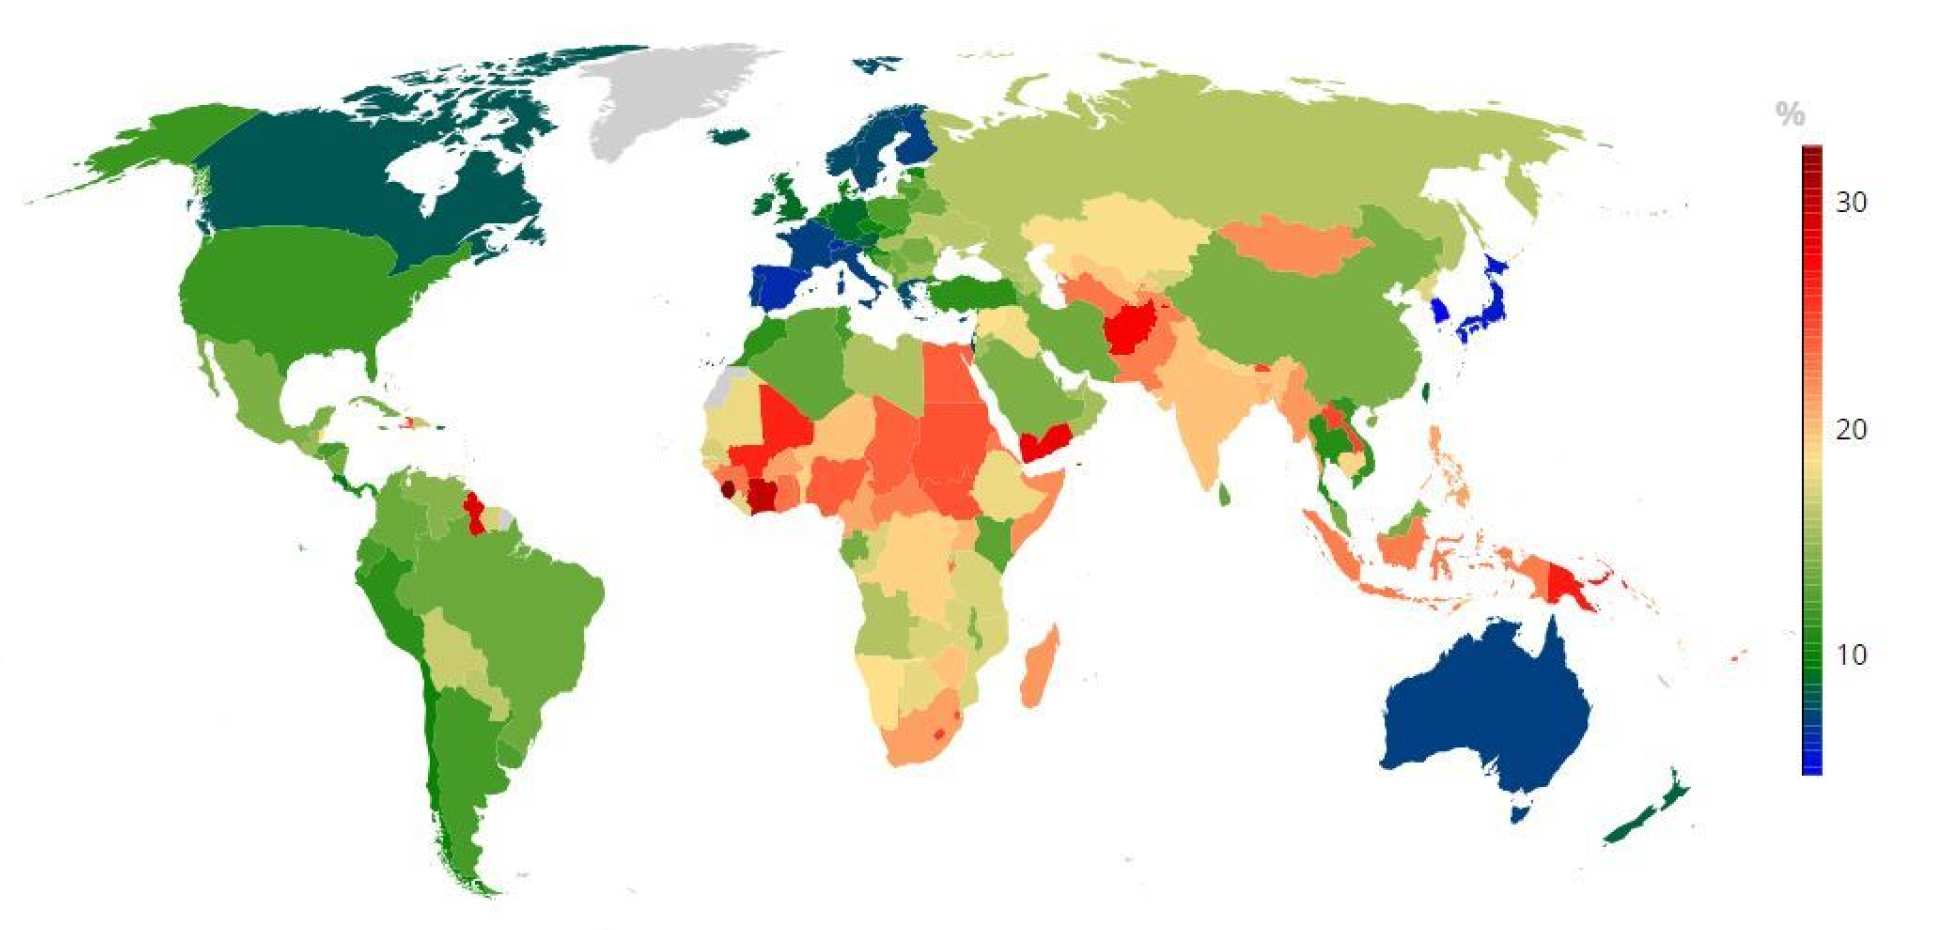 World map showing the probability of dying early from chronic disease between 30 and 70 years of age